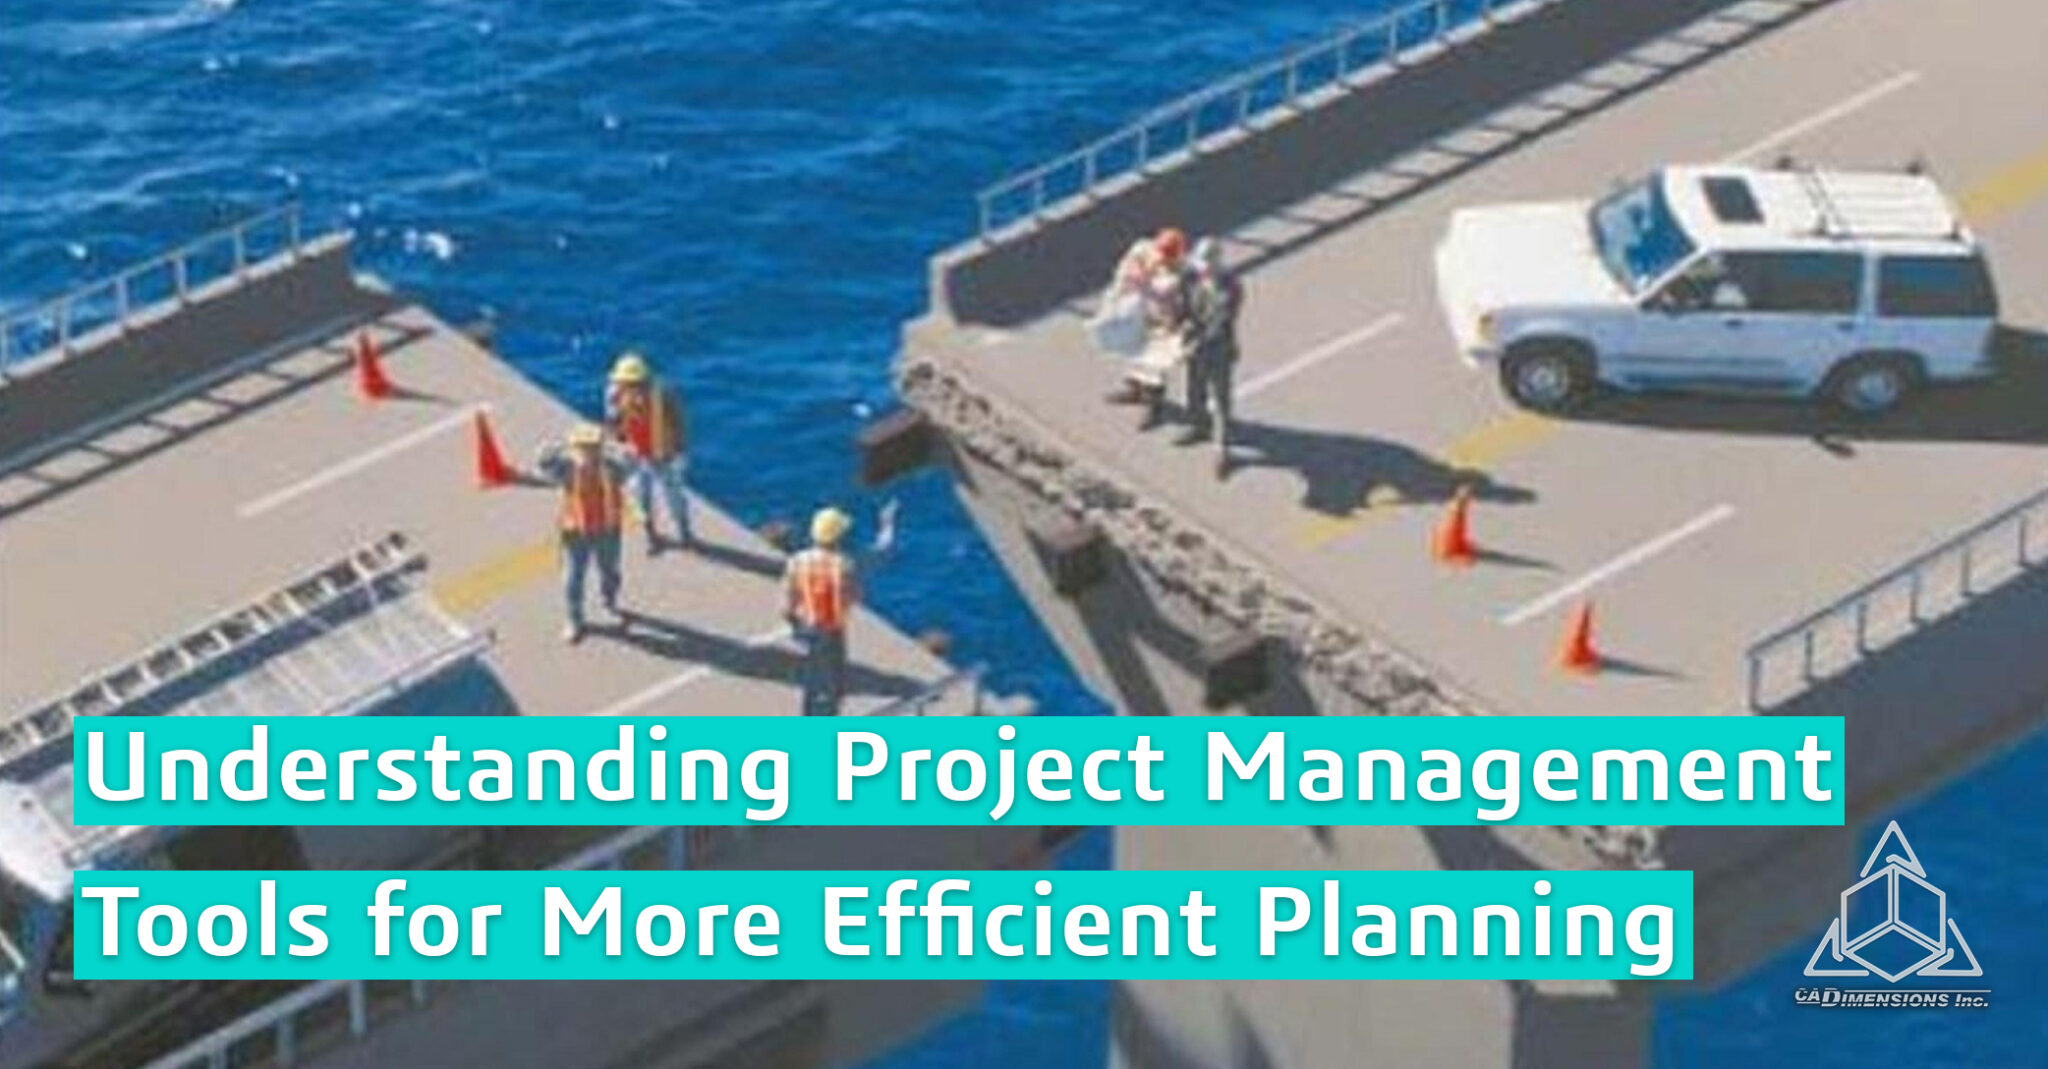 Plan Efficiently With Project Management Tools